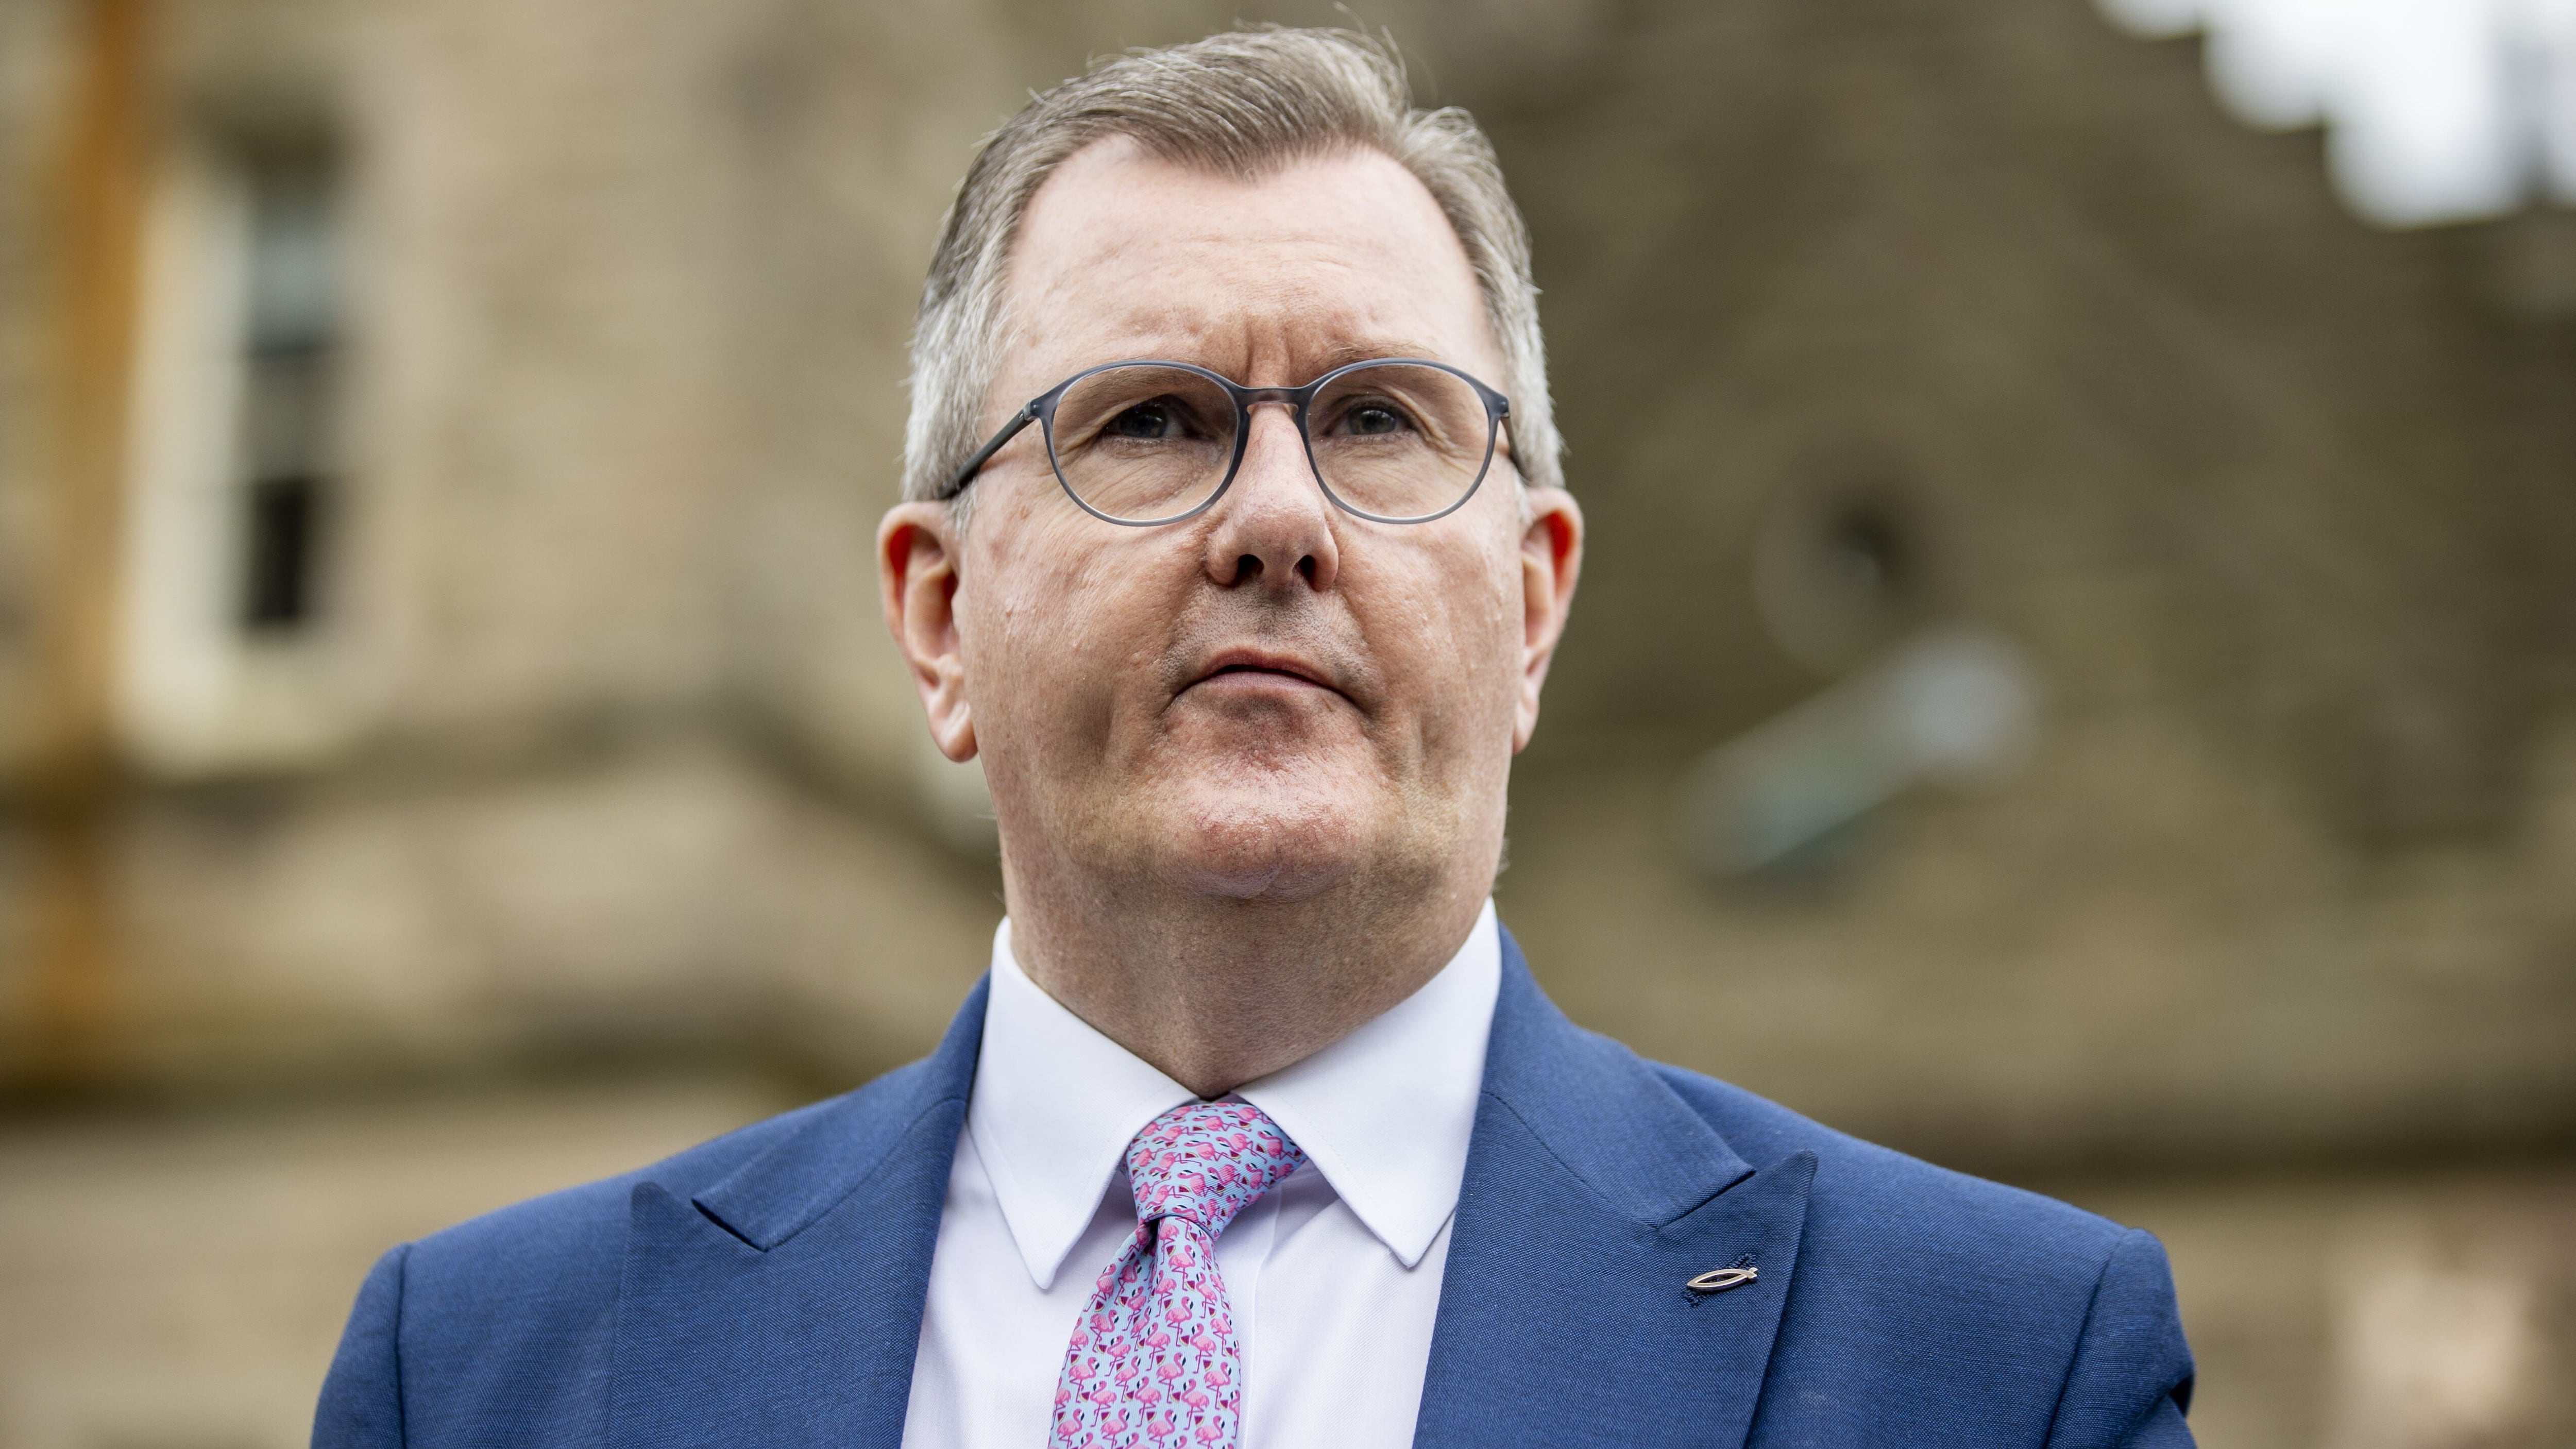 An interim leader should be appointed to steer the Police Service of Northern Ireland through a ‘crisis situation’, DUP leader Sir Jeffrey Donaldson has said (PA)